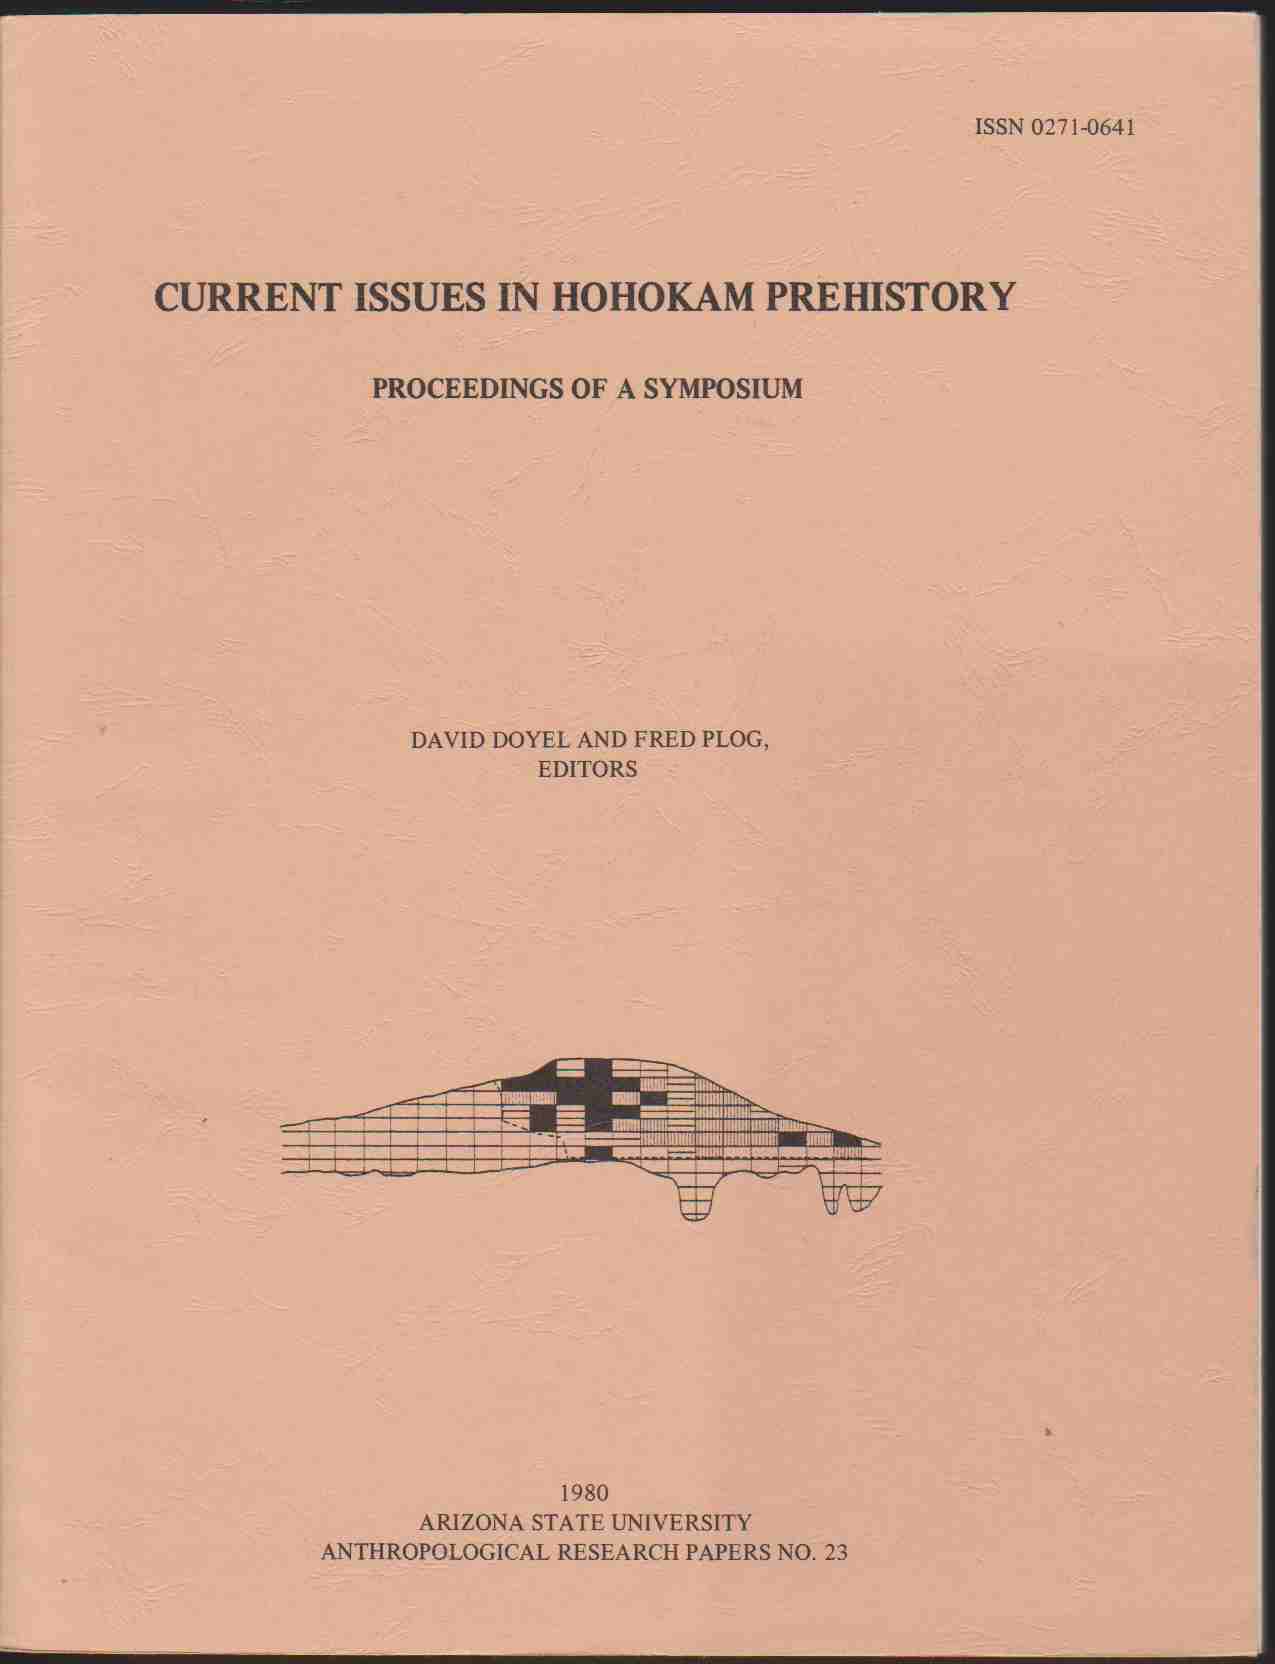 Image for CURRENT ISSUES IN HOHOKAM PREHISTORY. PROCEEDINGS OF A SYMPOSIUM. ARIZONA STATE UNIVERSITY ANTHROPOLOGICAL RESEARCH PAPERS NO. 23.